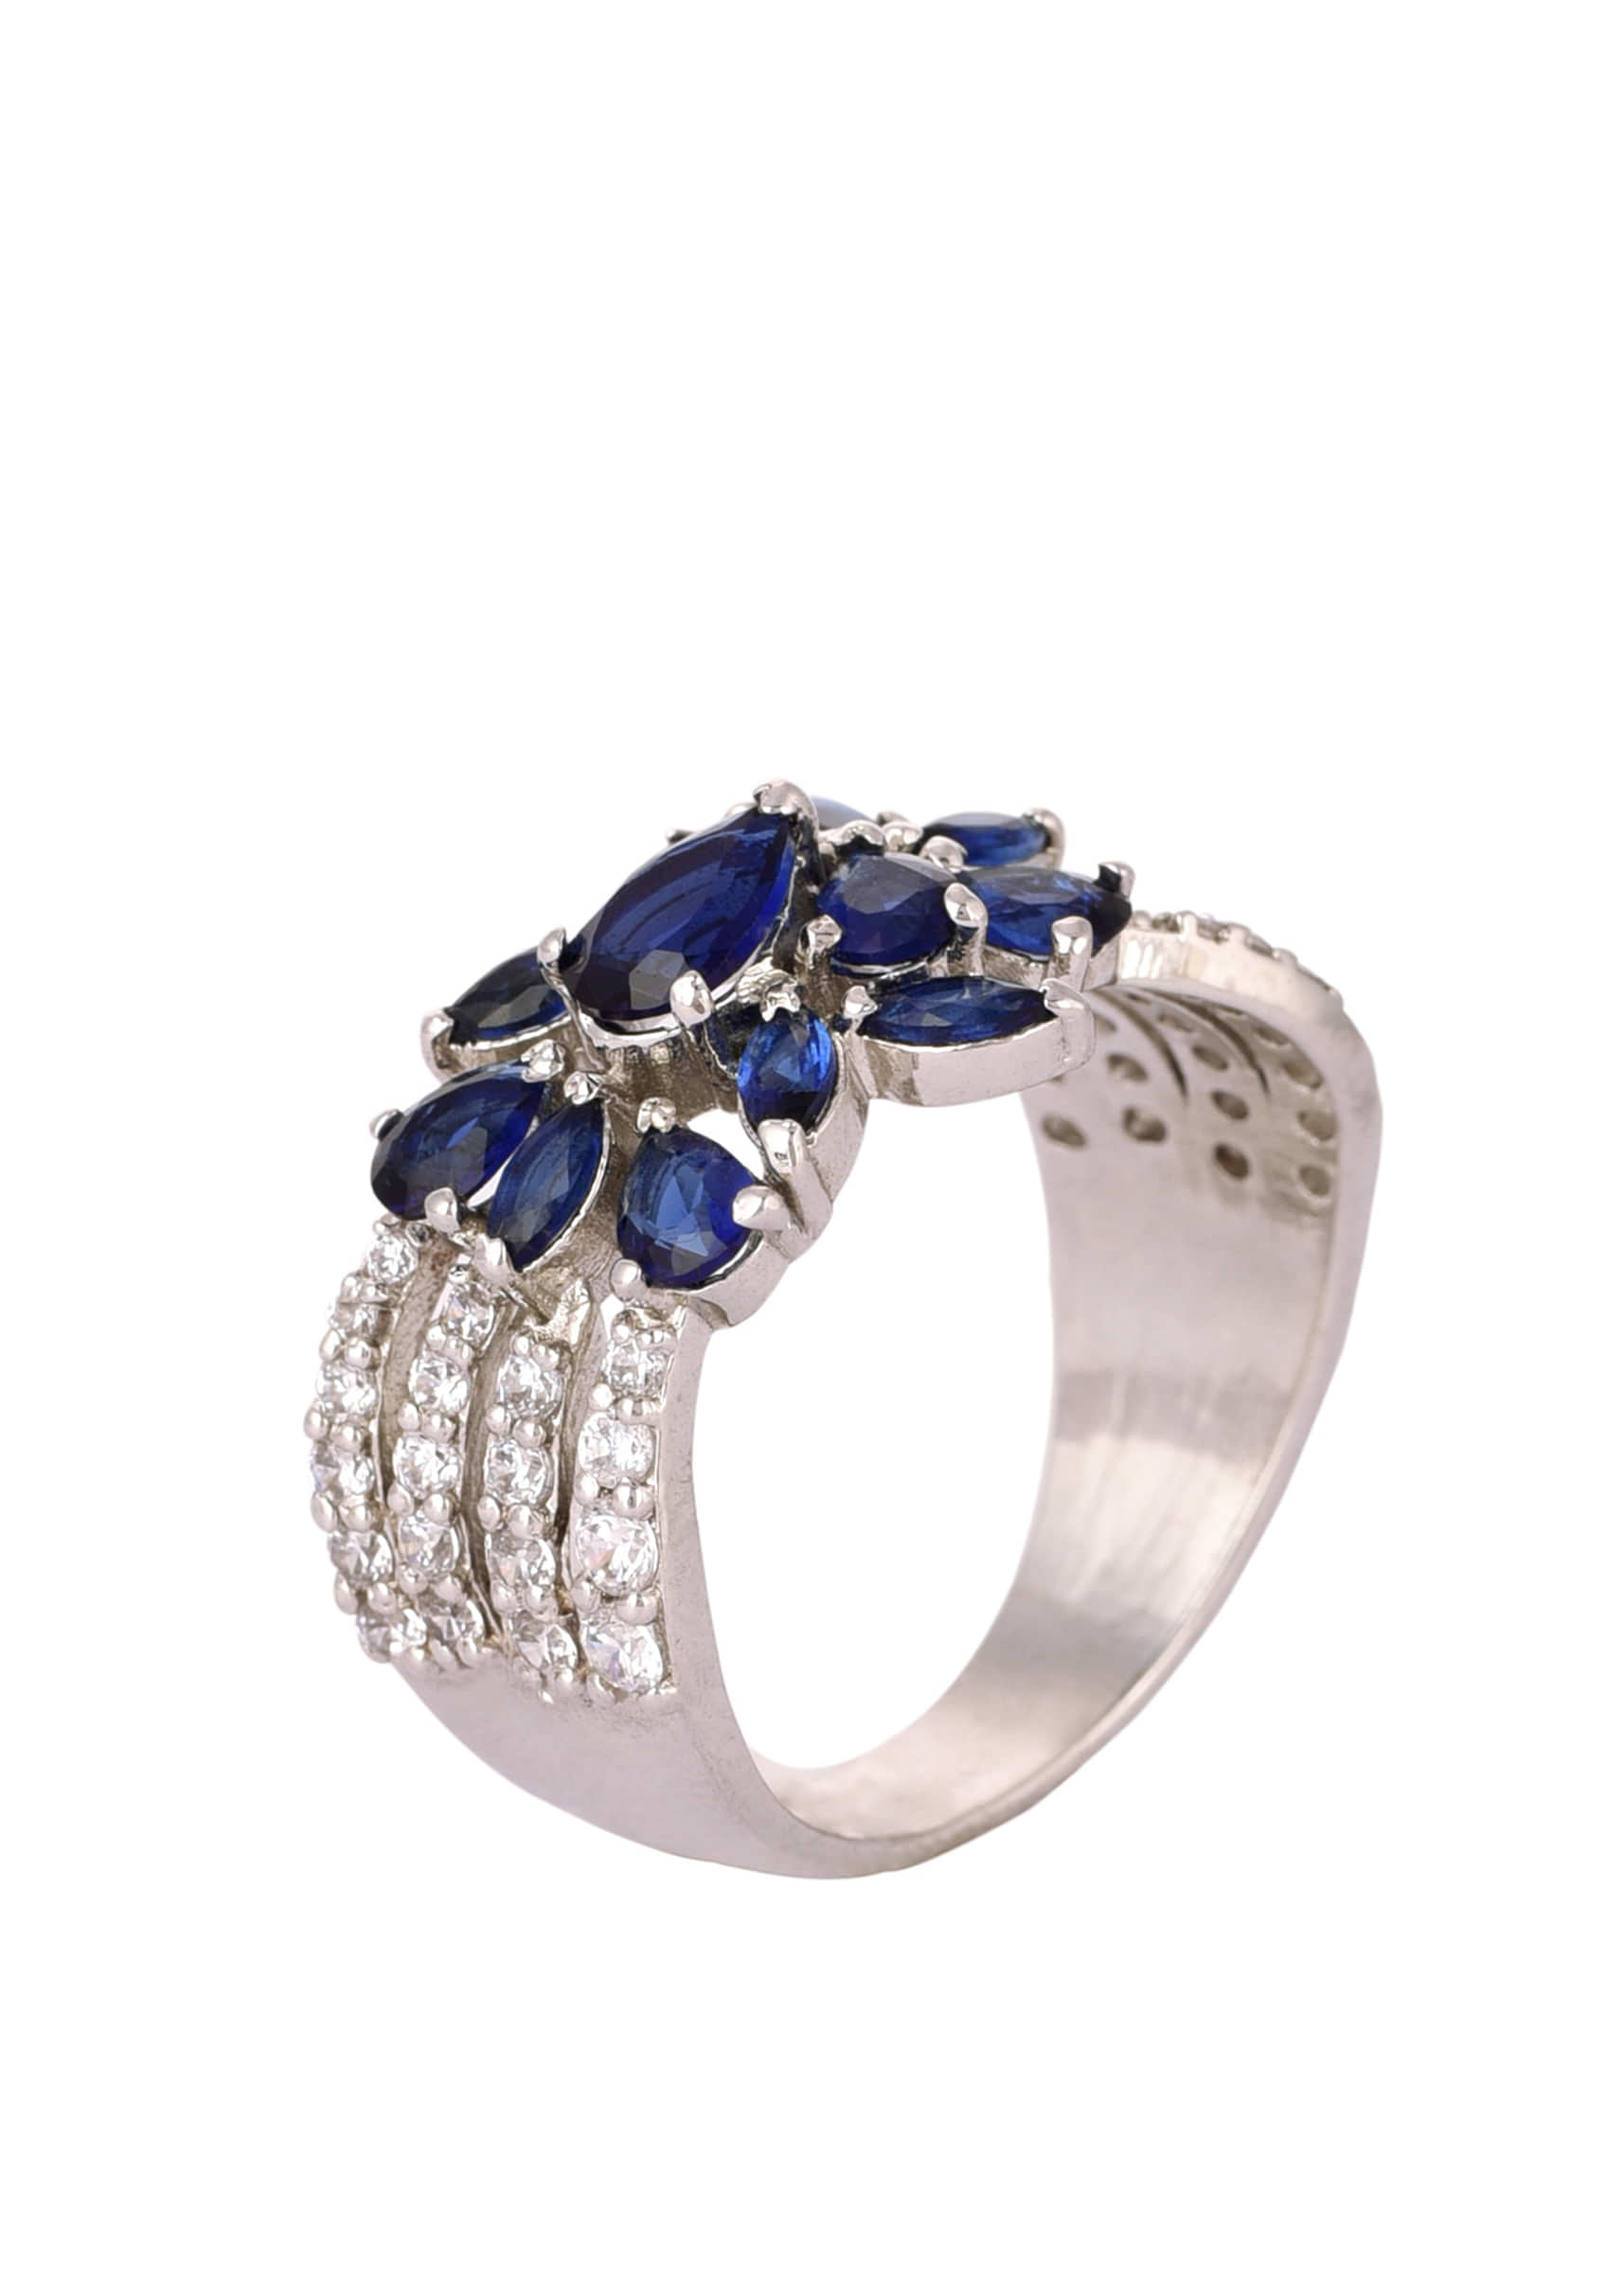 Blue And White Swarovski Cocktail Ring In 92.5 Sterling Silver